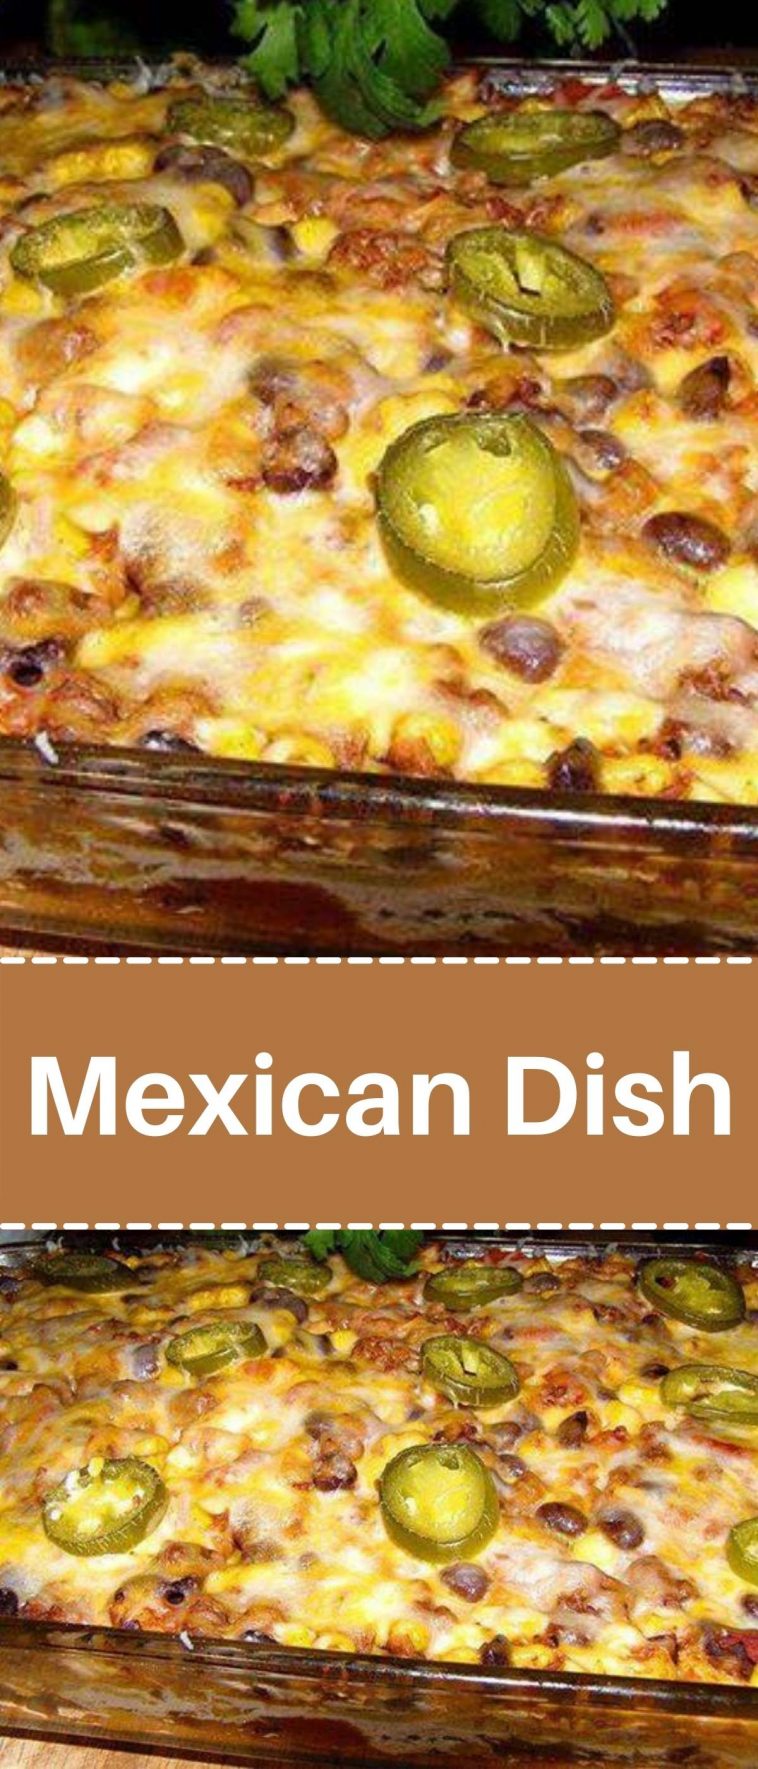 Mexican Dish